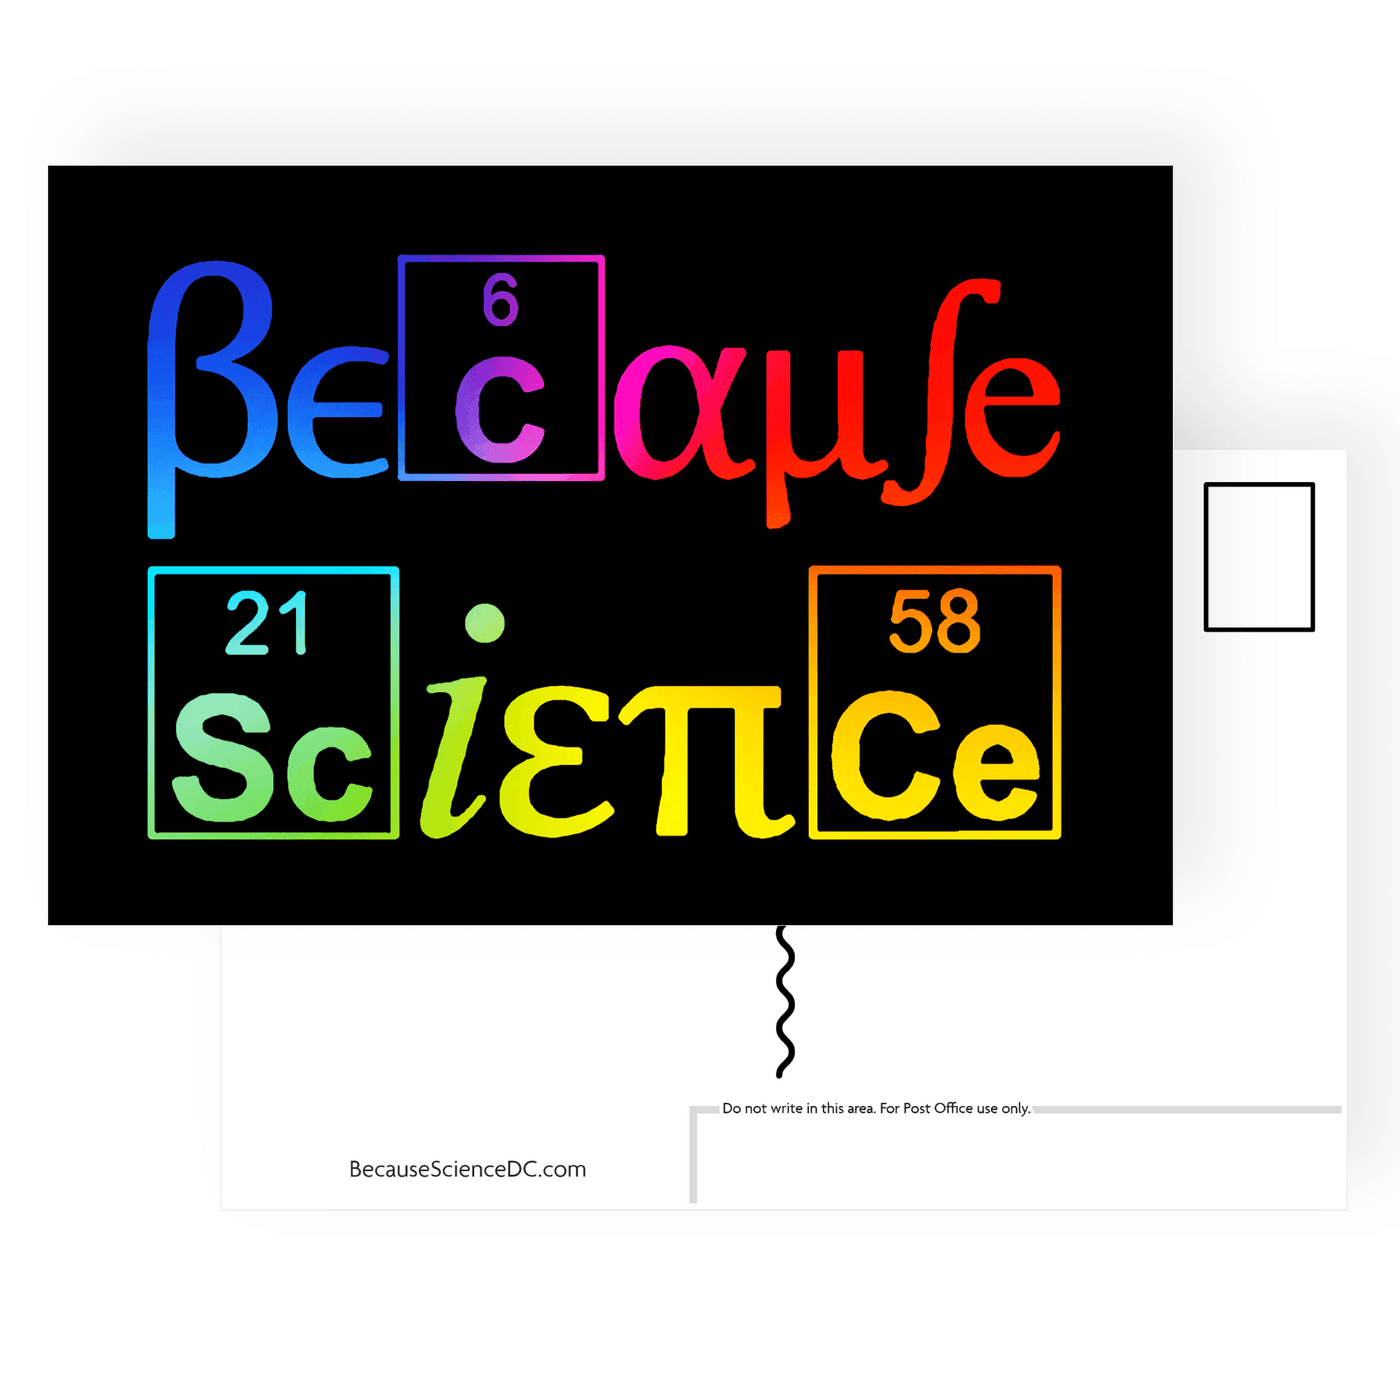 Image of a postcard with a science theme